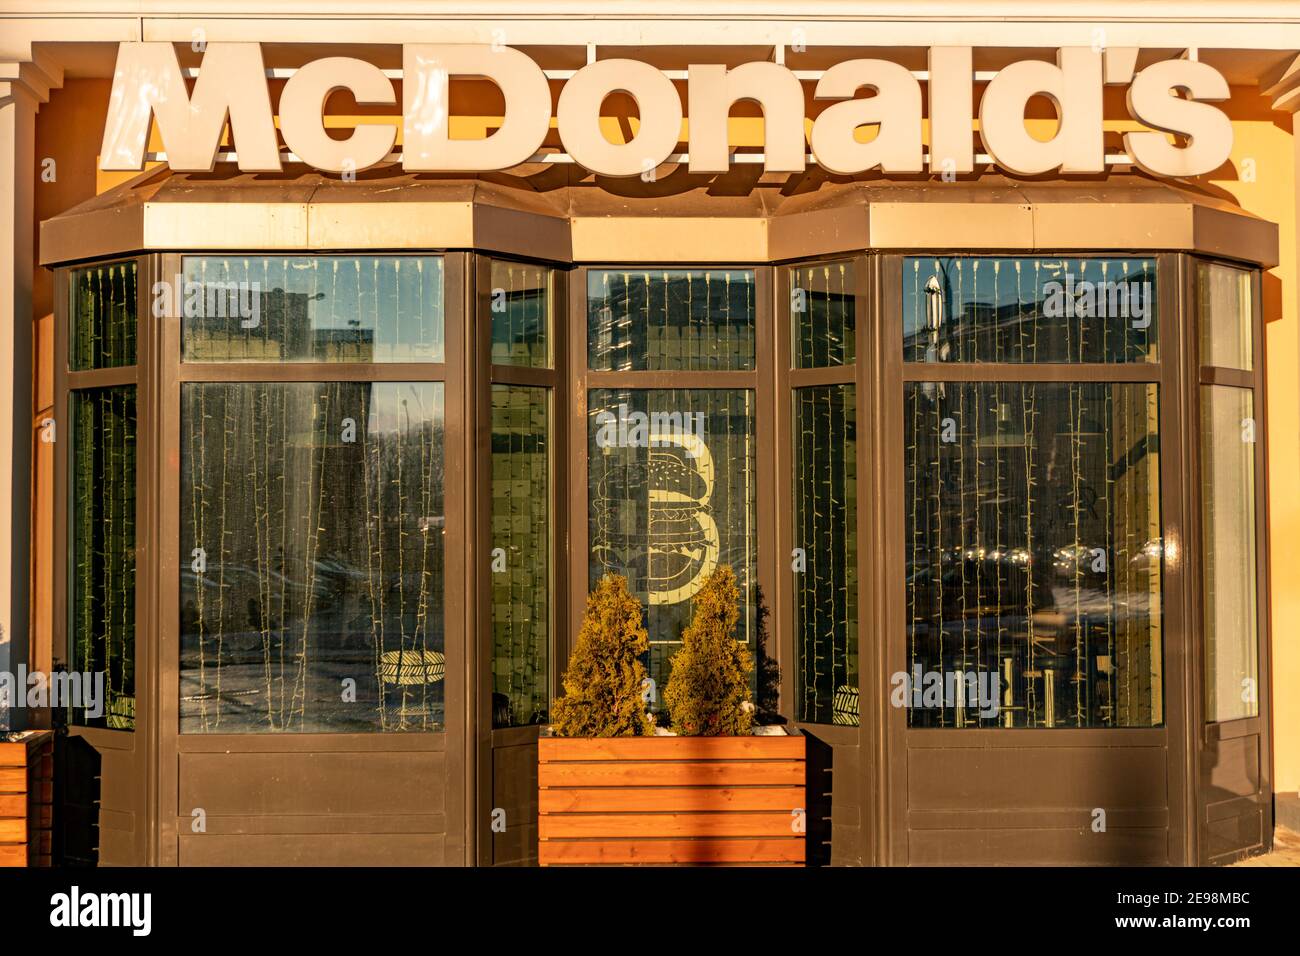 Minsk, Belarus - February 1, 2021: McDonald's sign text and brand logo on Restaurant Exterior of McDonalds fast food Stock Photo